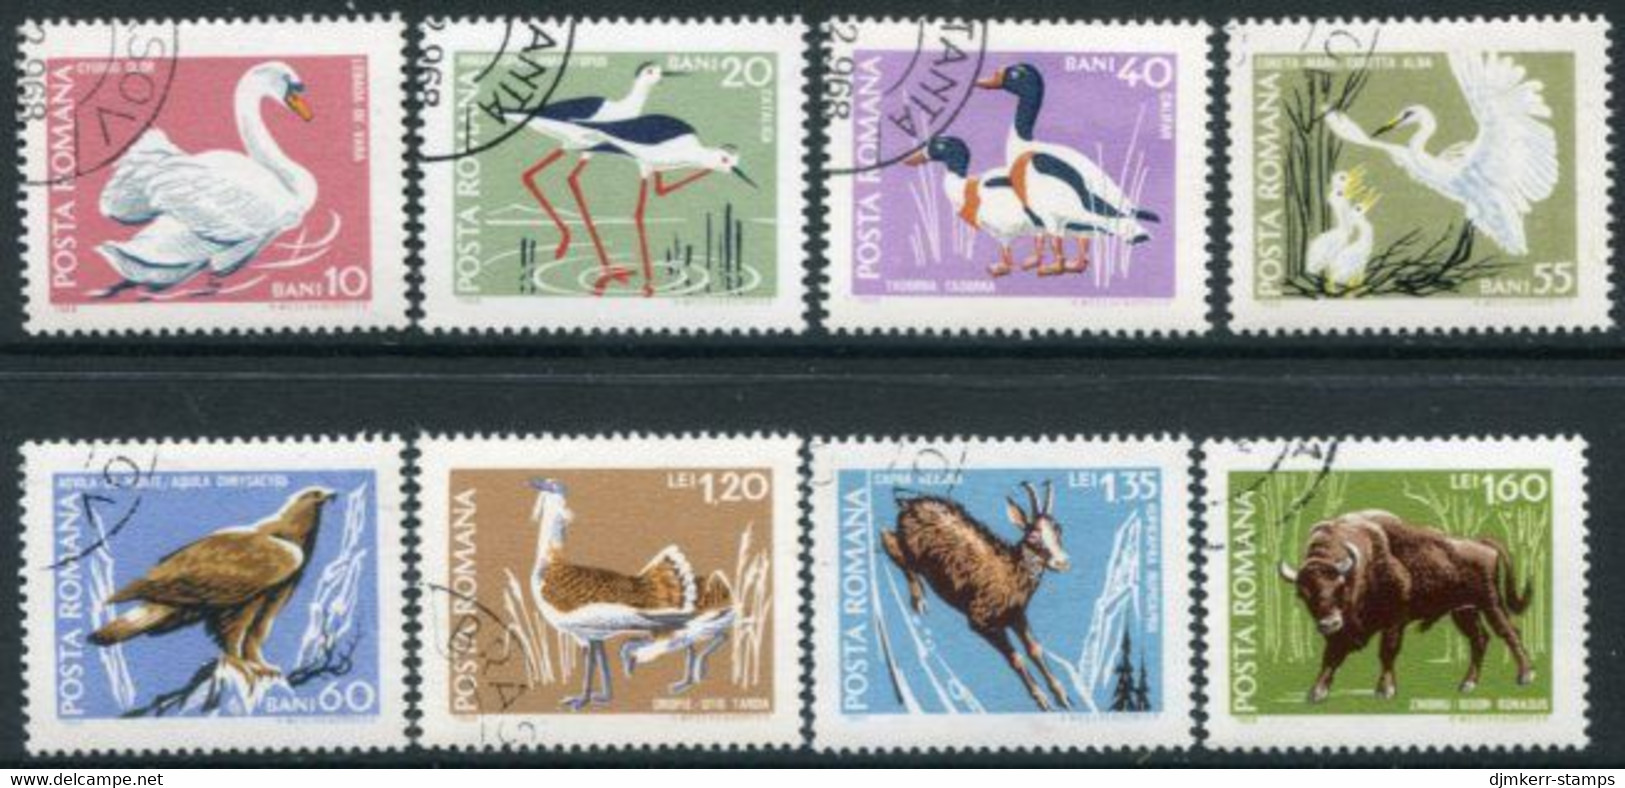 ROMANIA 1968 Protected Fauna  Used  Michel 2724-31 - Gebraucht